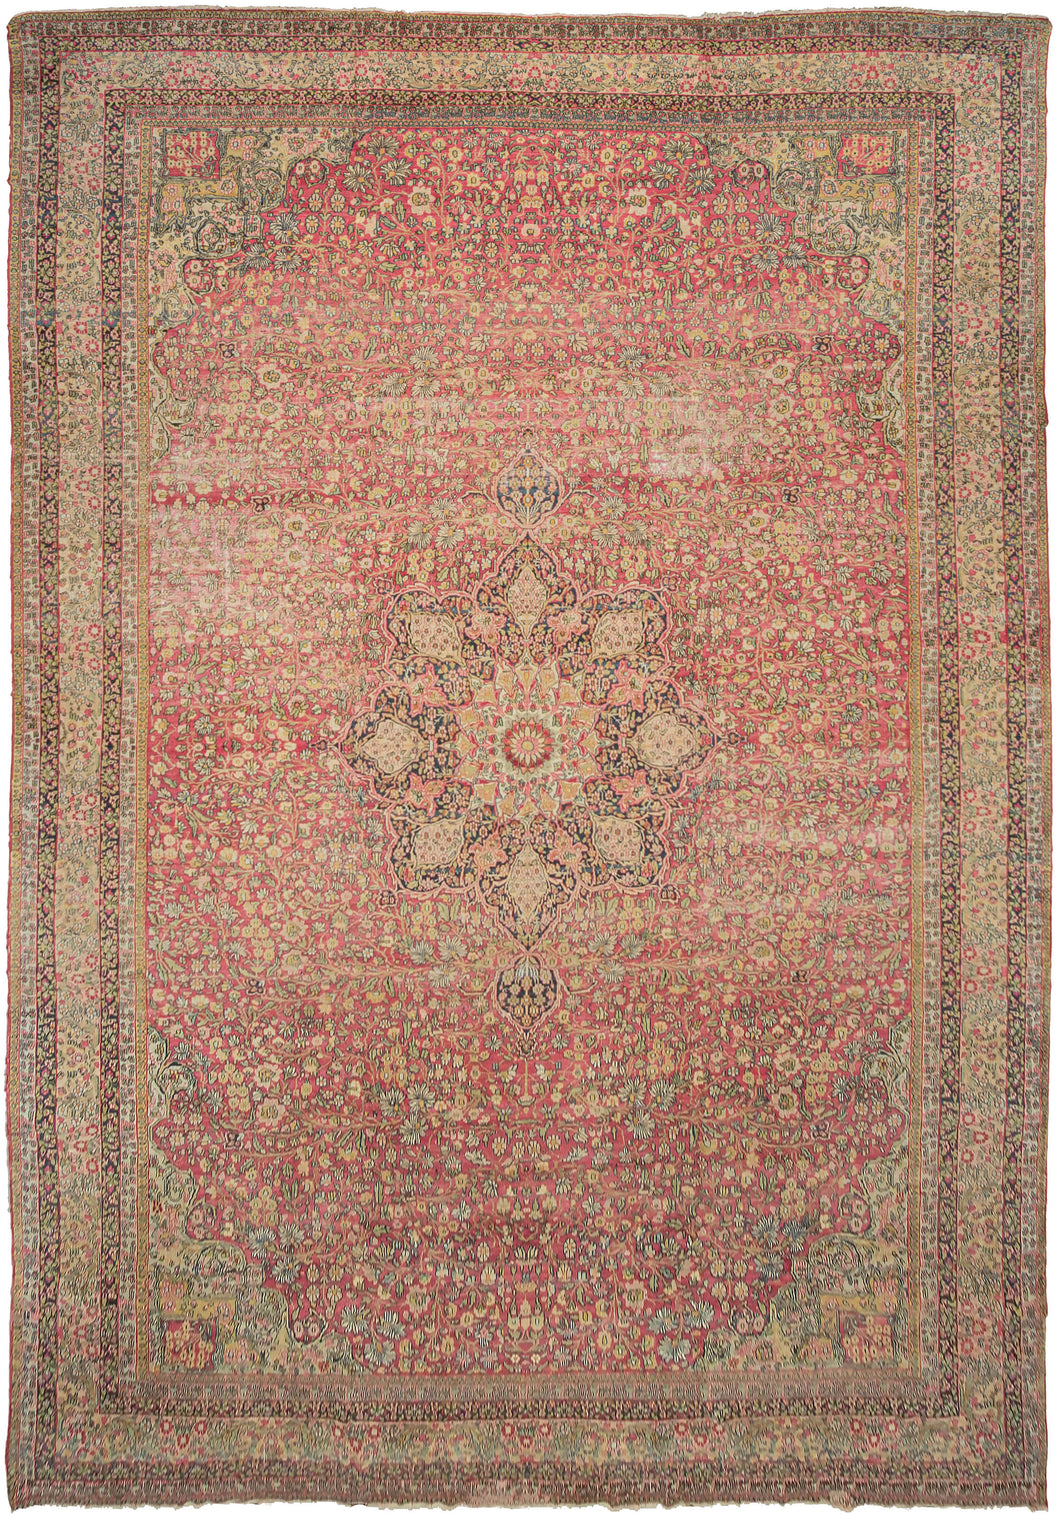 This Lavar Kerman rug was handwoven during latte 19th century in Central Iran.  This oversized rug features a central medallion with a curvilinear floral design and scalloped cornices. The cornices are distinct but have a continuous feel with the central medallion. The field features a vast array of blossoming flowers on patinated fuschia ground.  Tones of yellow, golden wheat, chartreuse, coral and ivory round out the gentle and nuanced palette. 